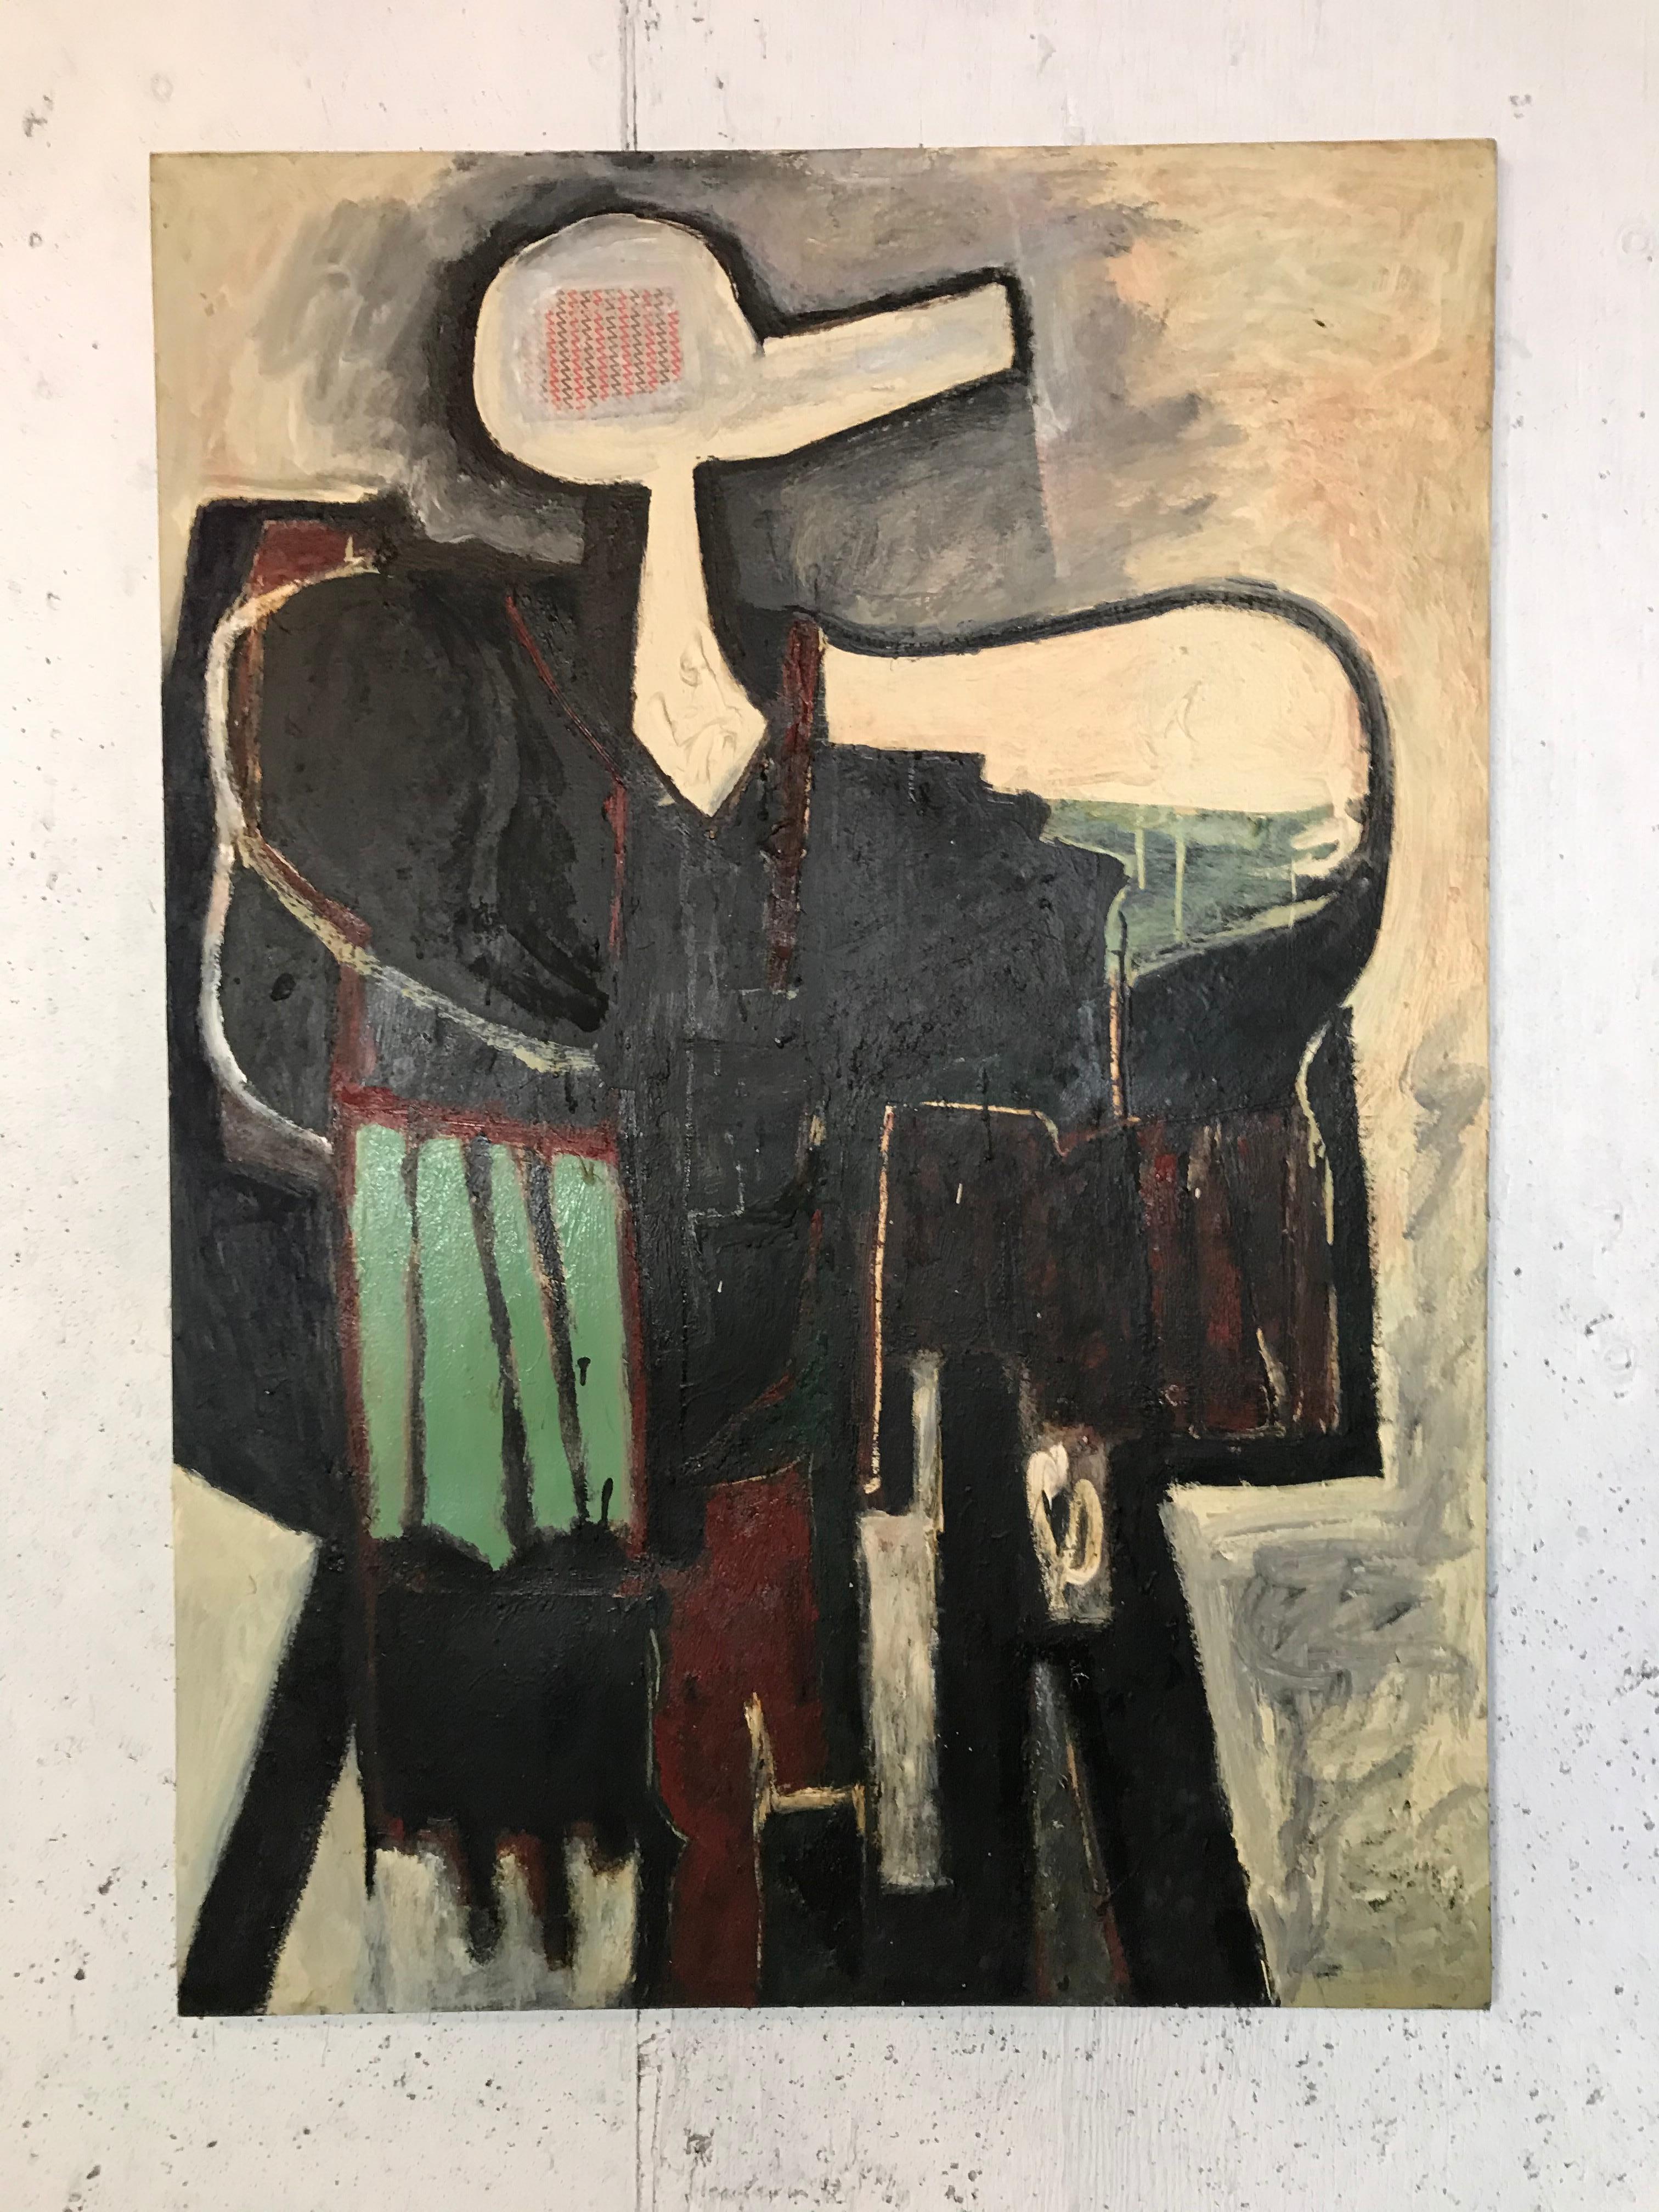 Excellent large scale abstract expressionist mixed-media painting by New York artist John 'Jack' Hammack (1925-1990), 1964. Oil on canvas.
Jack's works have been recently discovered in the Pacific Northwest where he lived the remainder of his life;